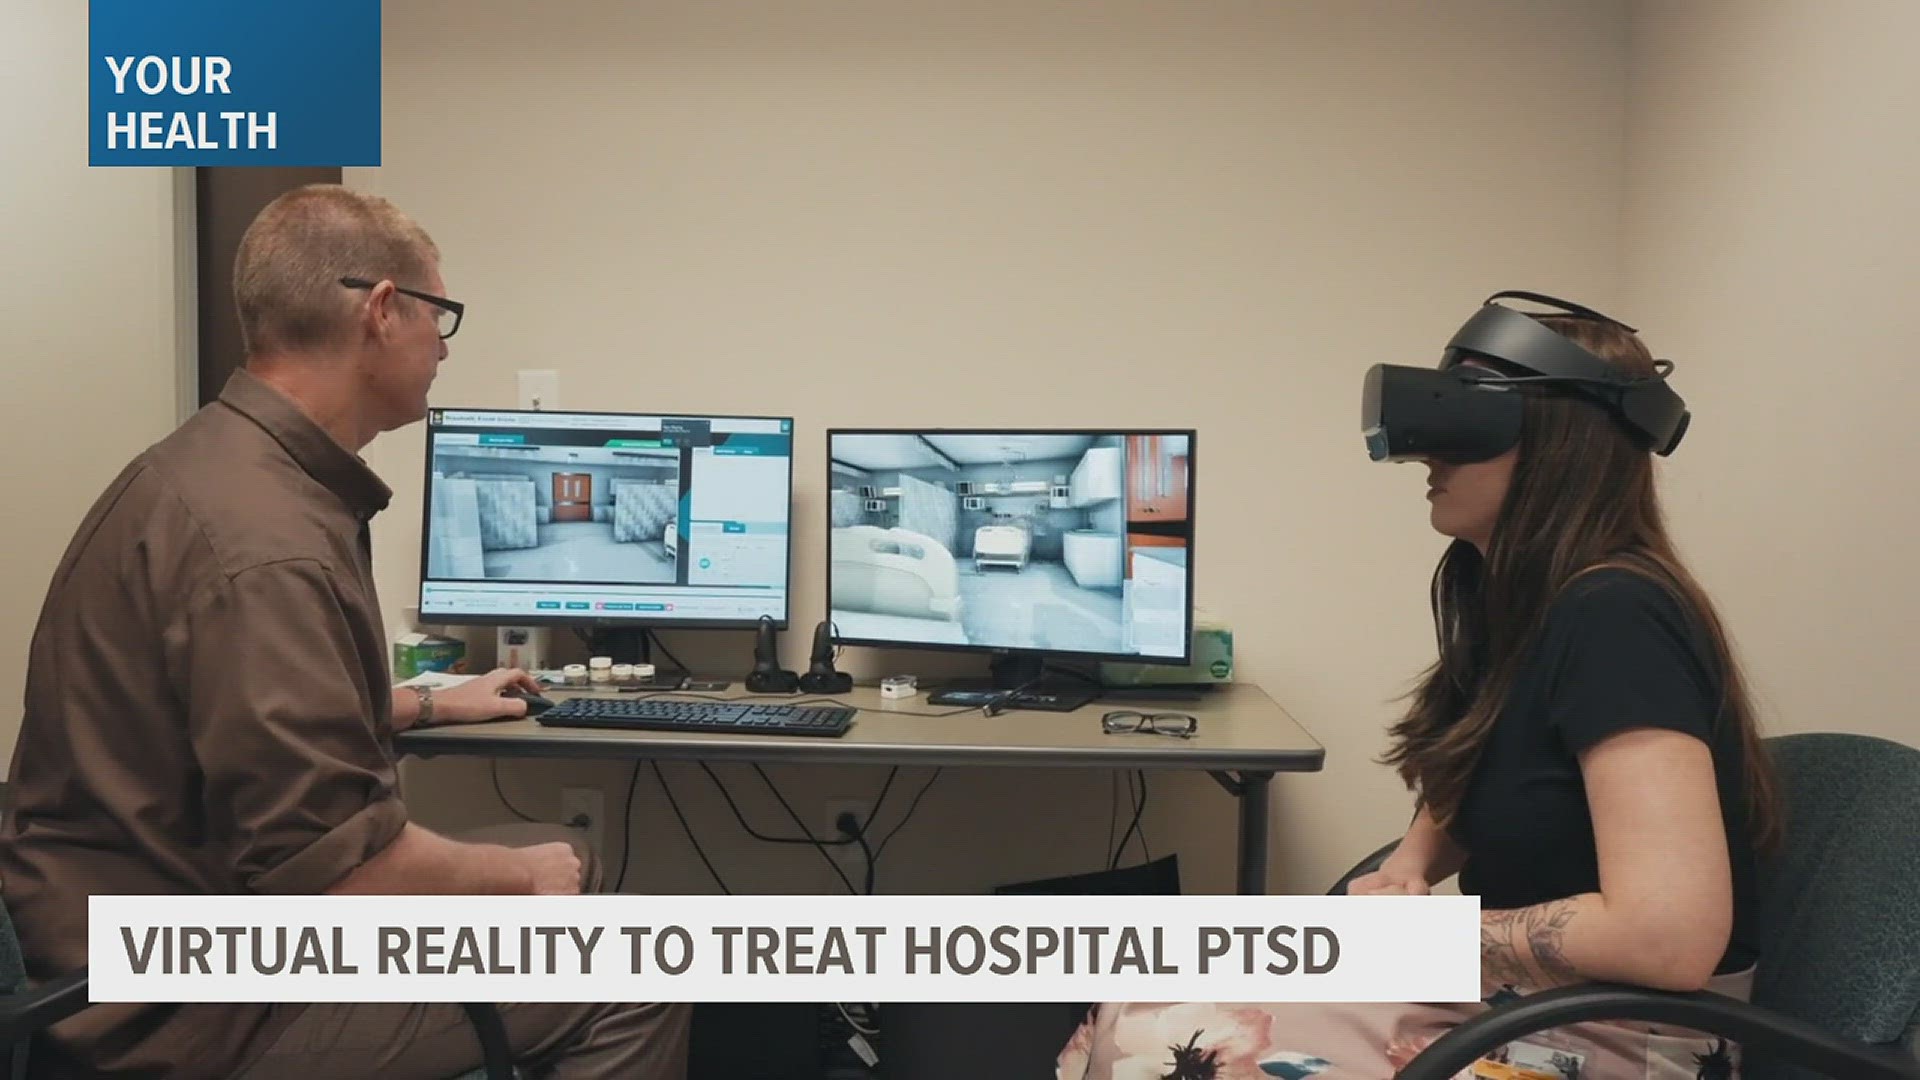 Virtual reality technology is helping patients regain confidence in every day activities. Learn more about one woman's story and how this process eased her anxiety.